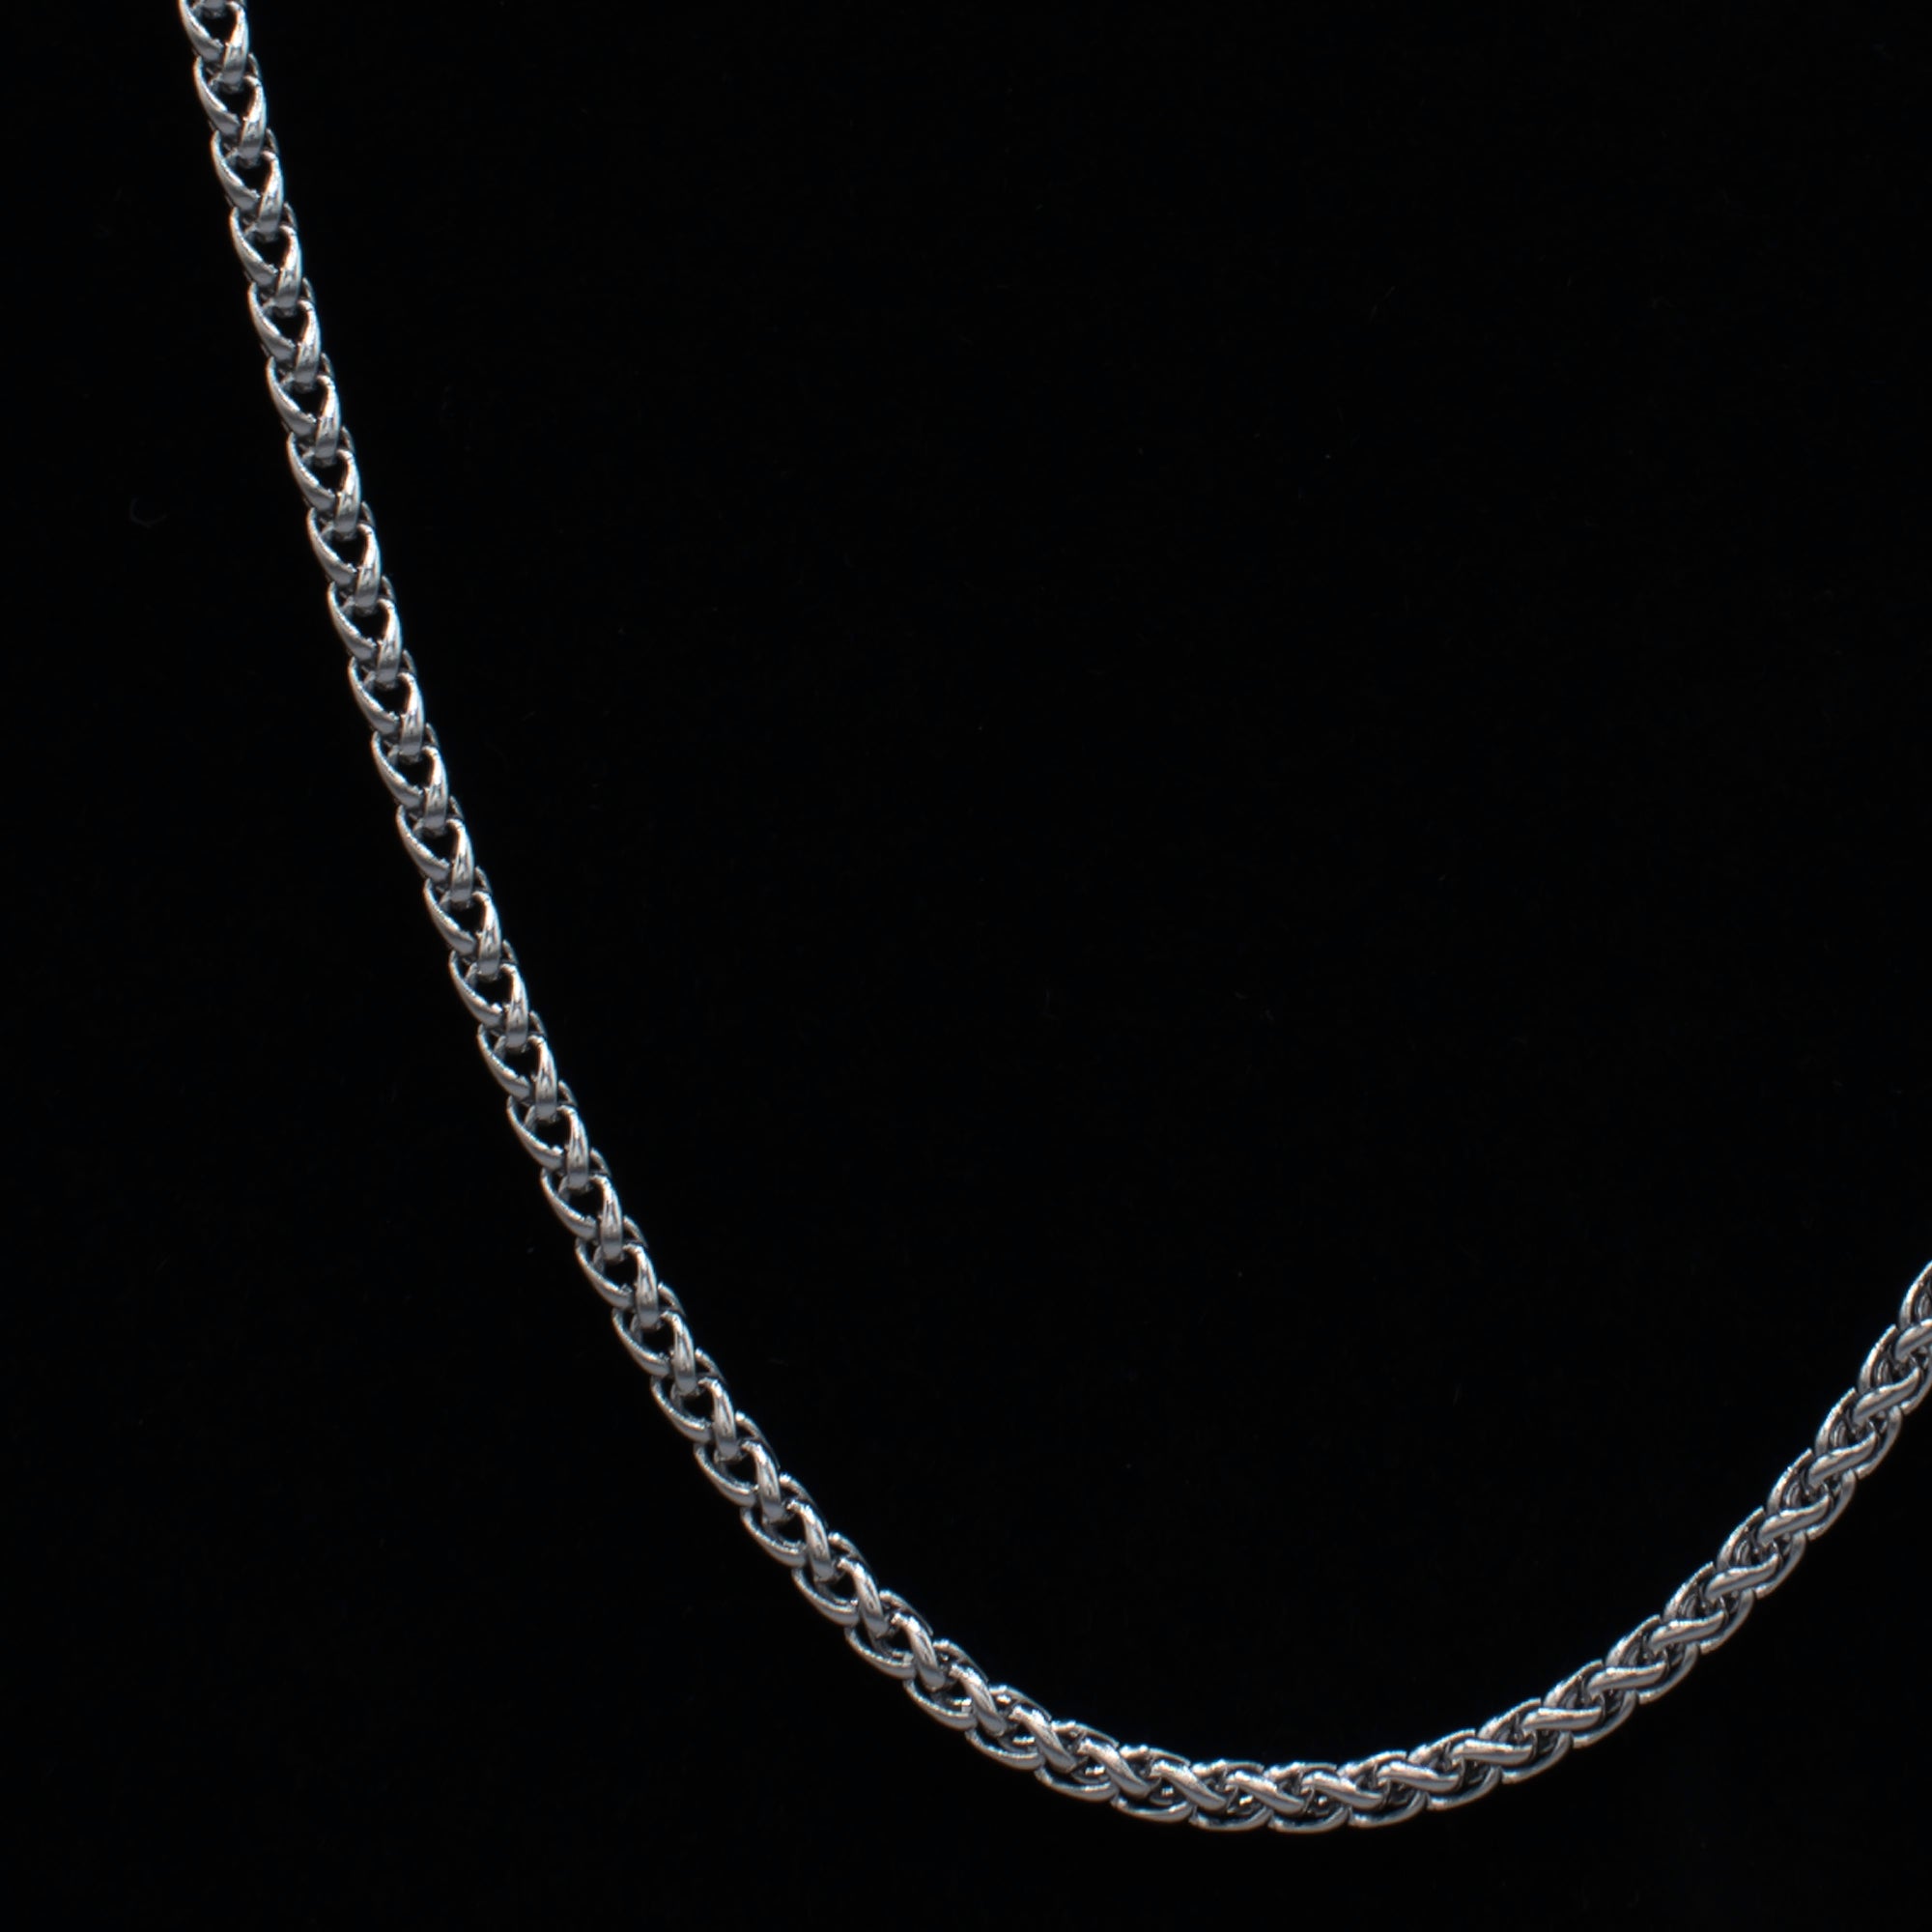 Silver Foxtail Necklace - 3mm